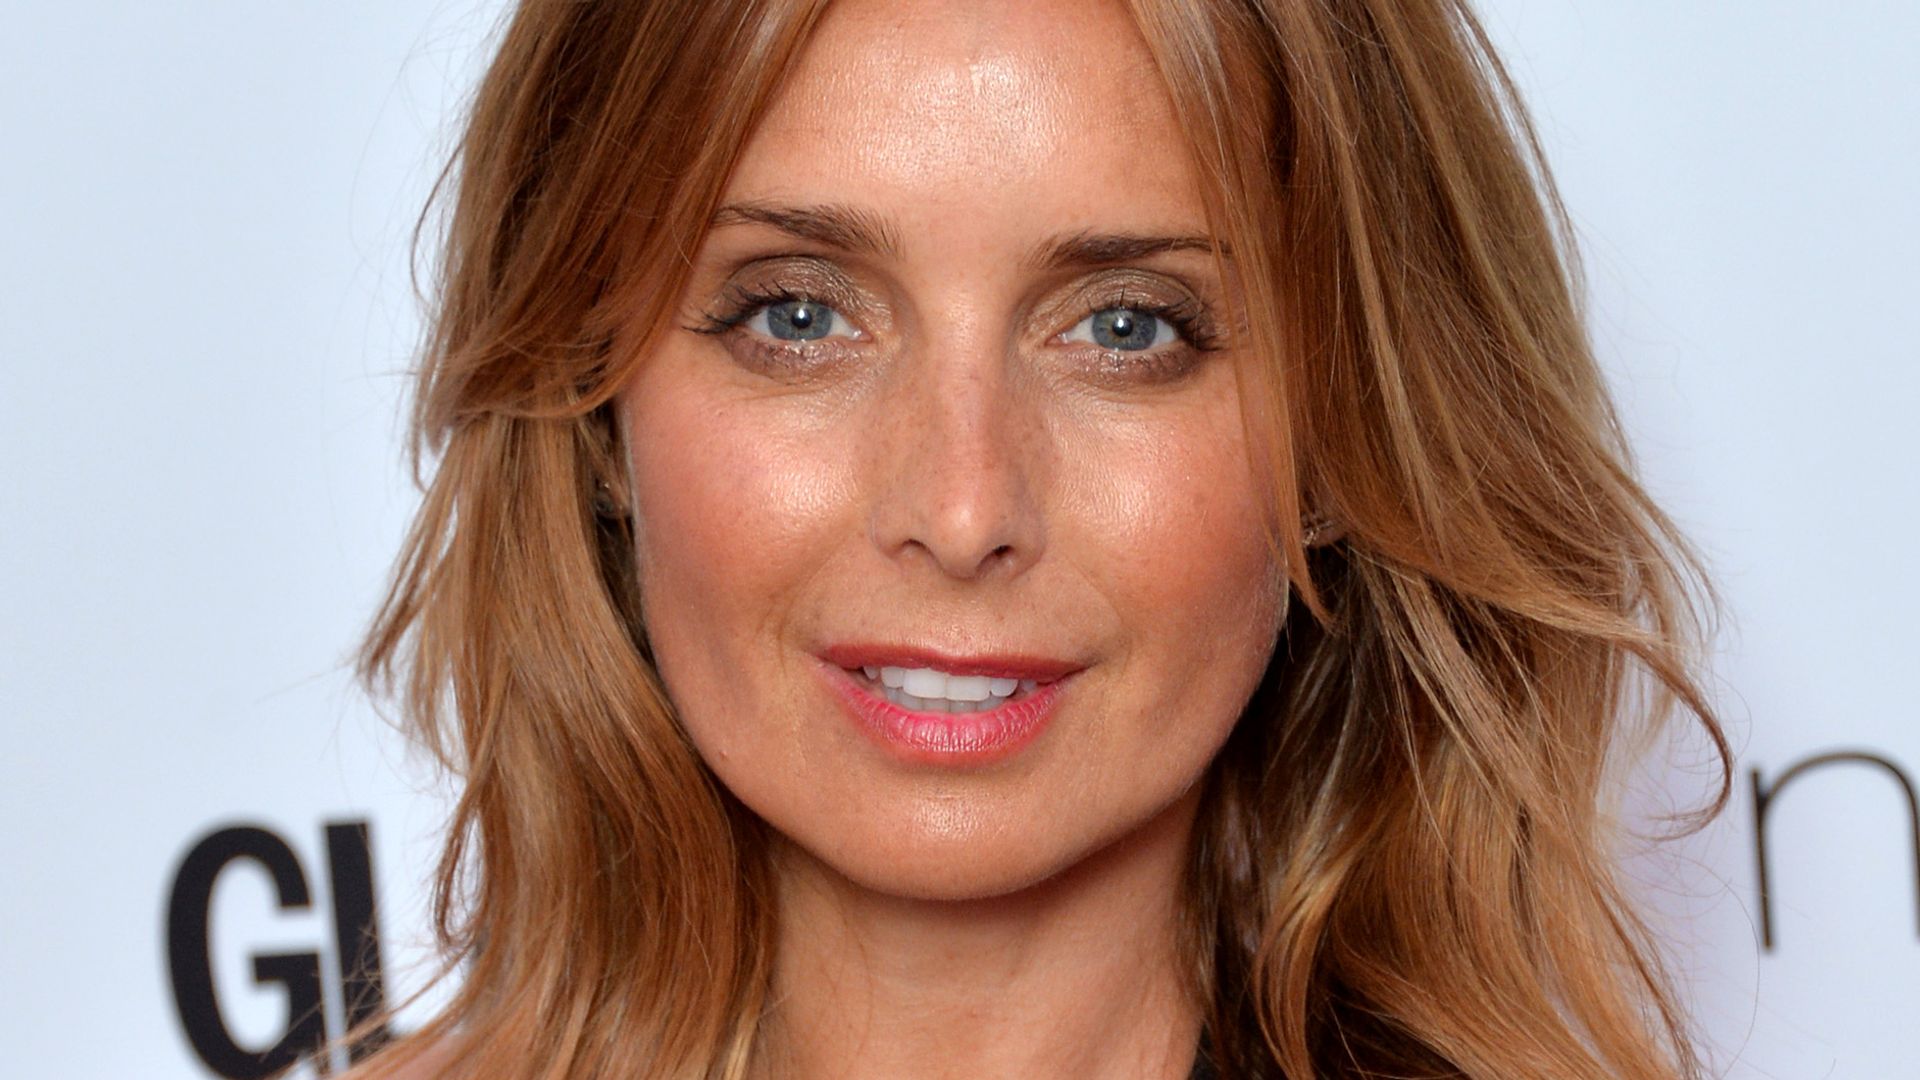 Louise Redknapp attends the Glamour Women Of The Year Awards at Berkeley Square Gardens on June 7, 2016 in London, England.